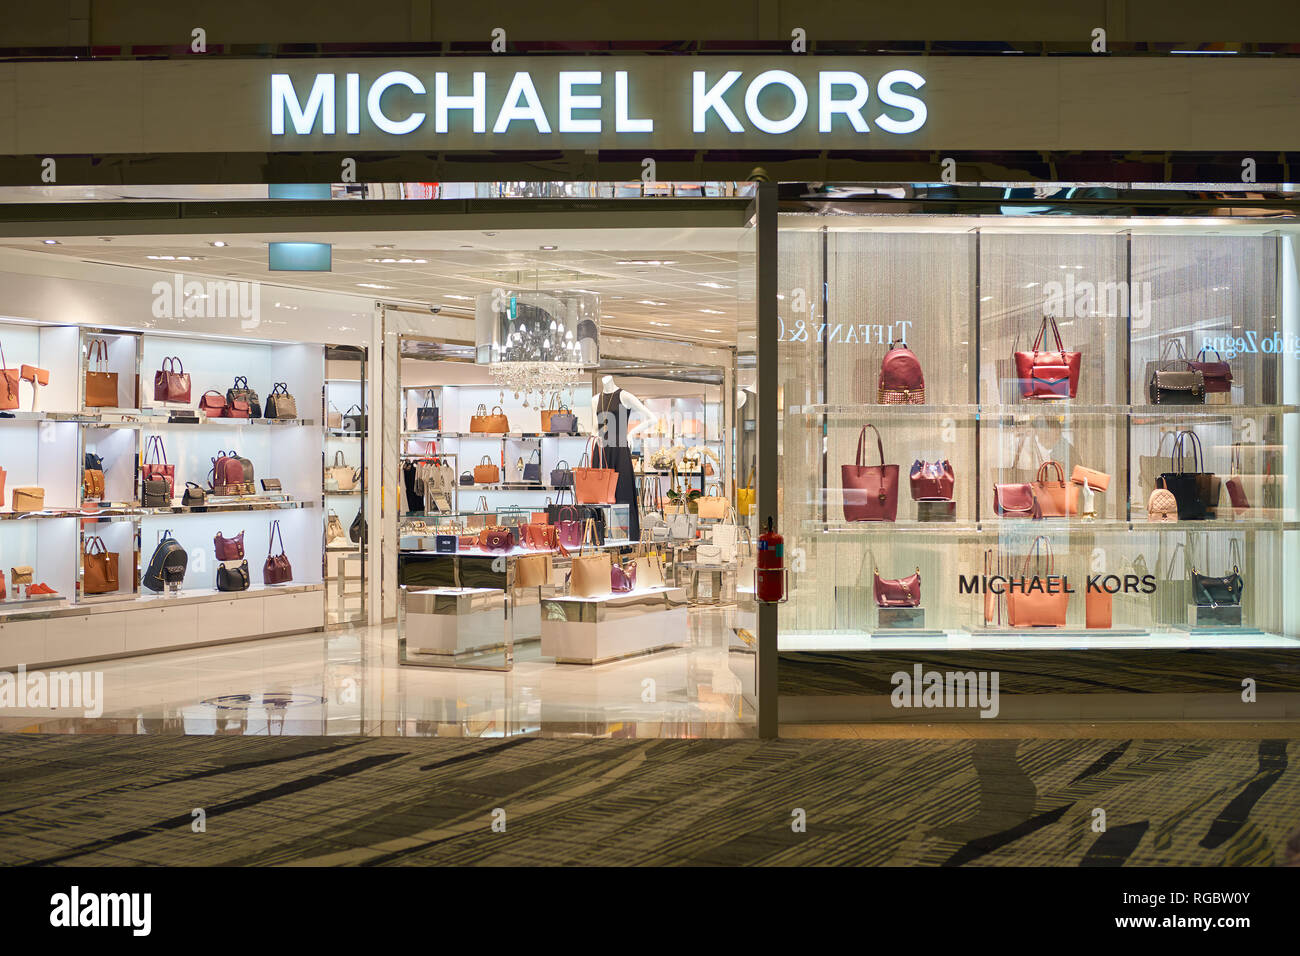 Michael Kors Bags High Resolution Stock Photography and Images - Alamy